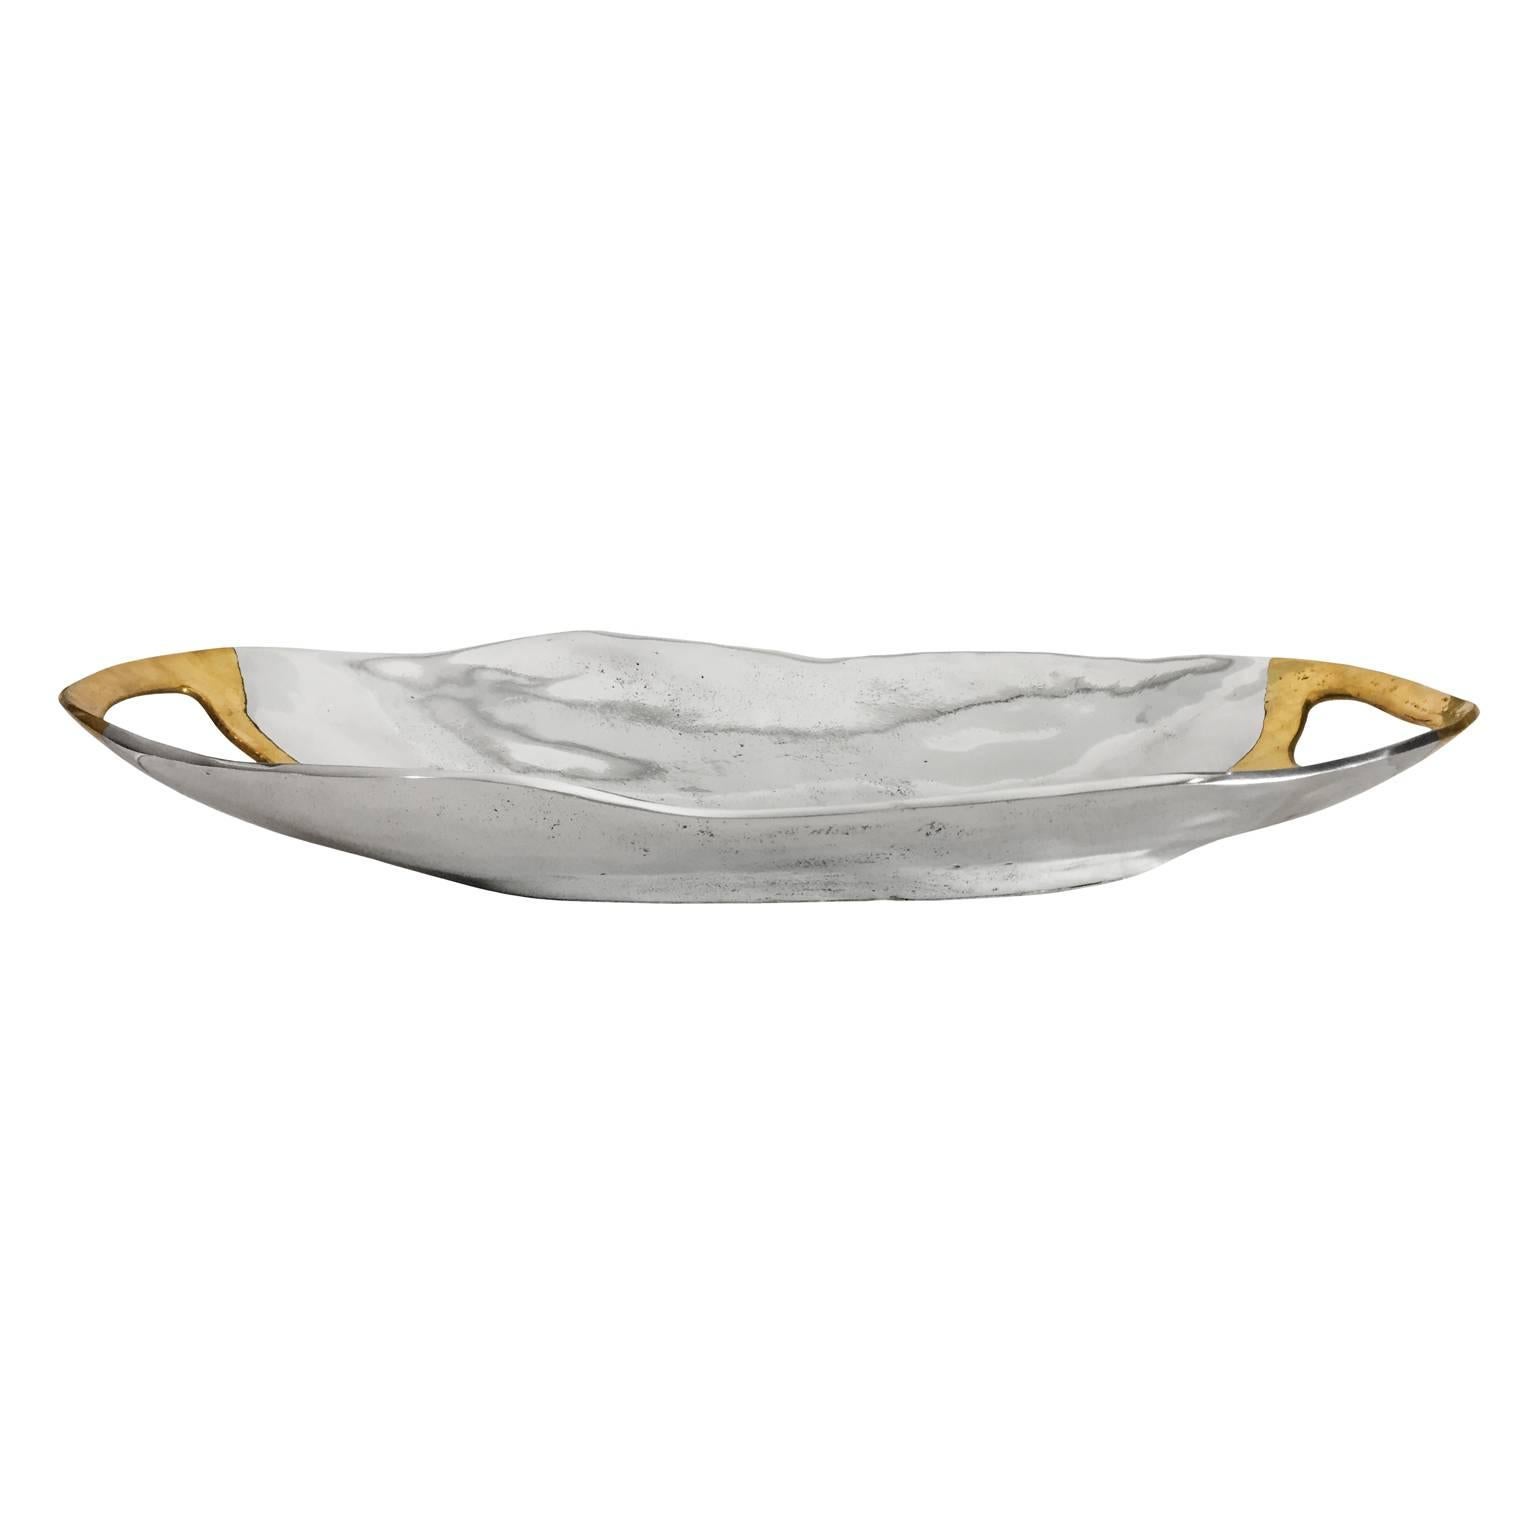 1970s Aluminum and Brass Free-Form Centerpiece Bowl by David Marshall